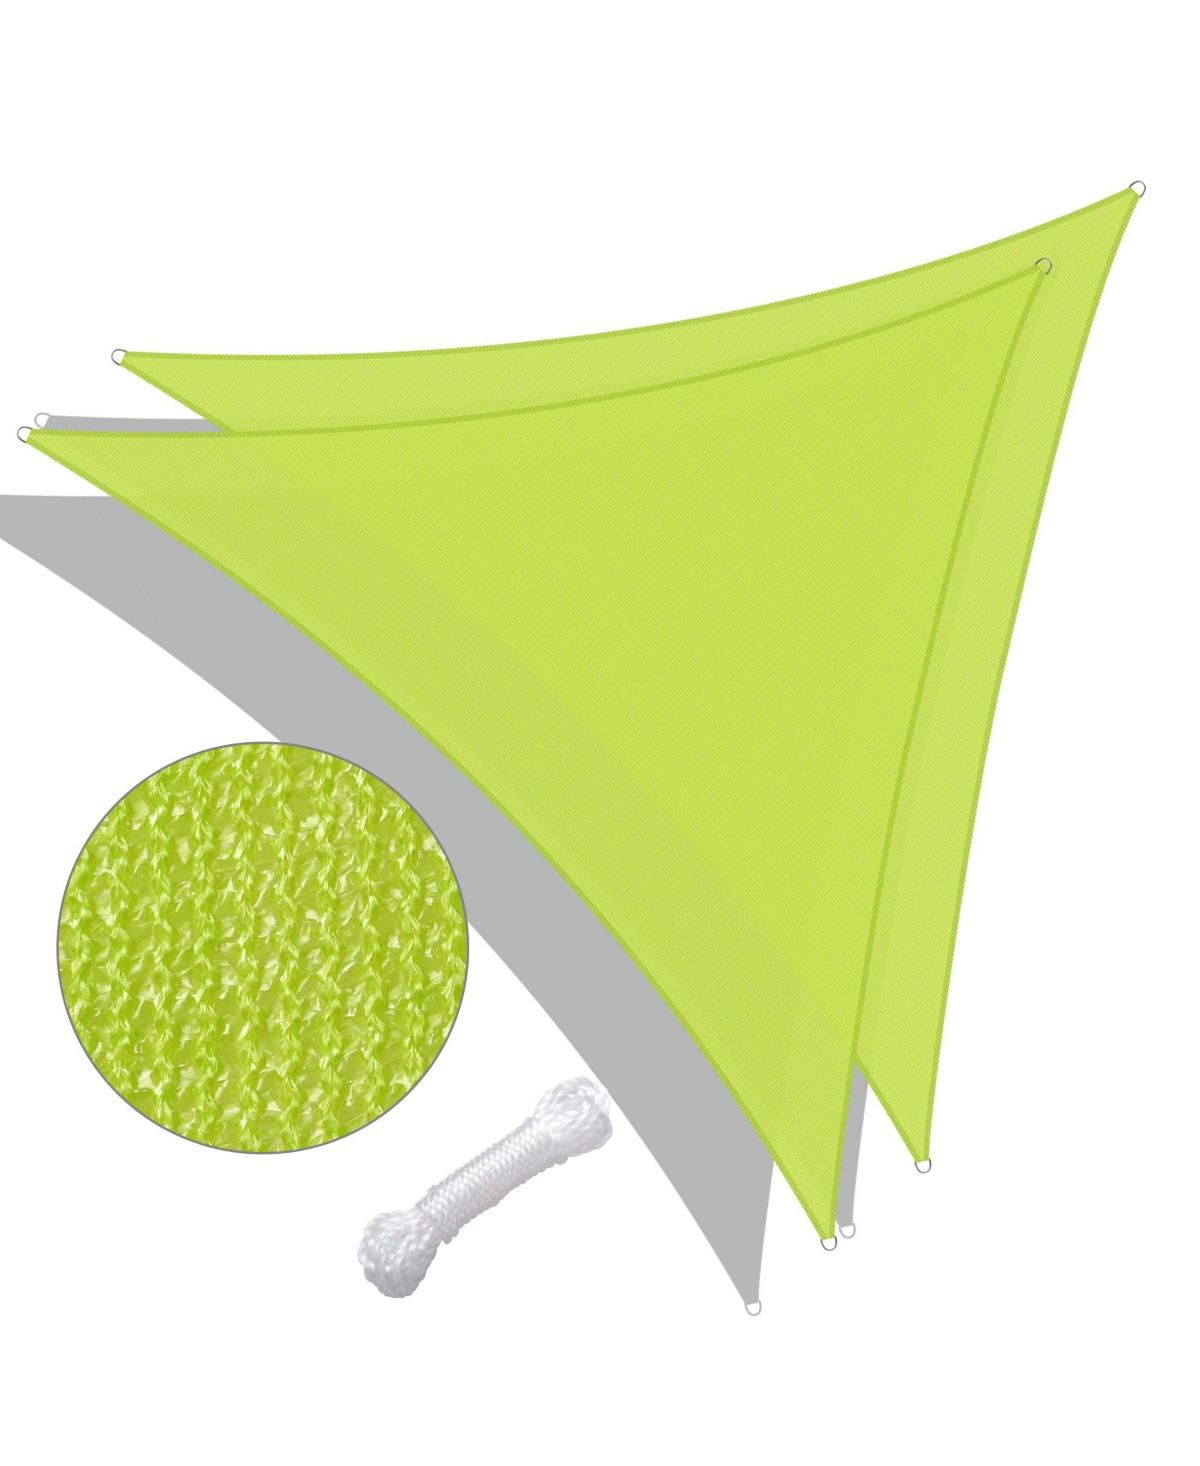 2 Pack 25 Ft 97% Uv Block Triangle Sun Shade Sail Canopy Cover Net Outdoor Lawn - Bright green